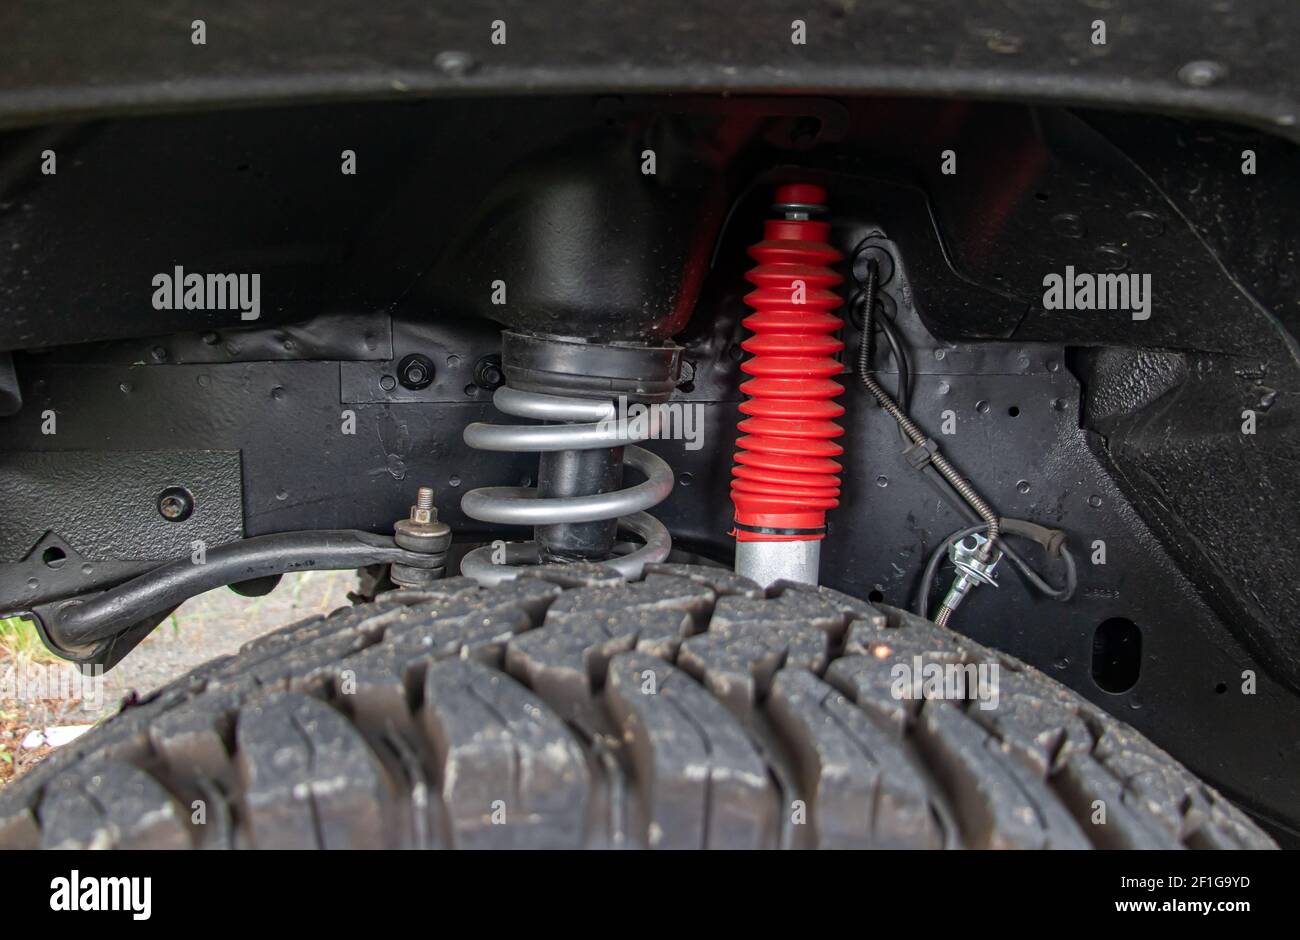 Off-road car chassis with a detailed view of the coil spring at the front wheel. Stock Photo